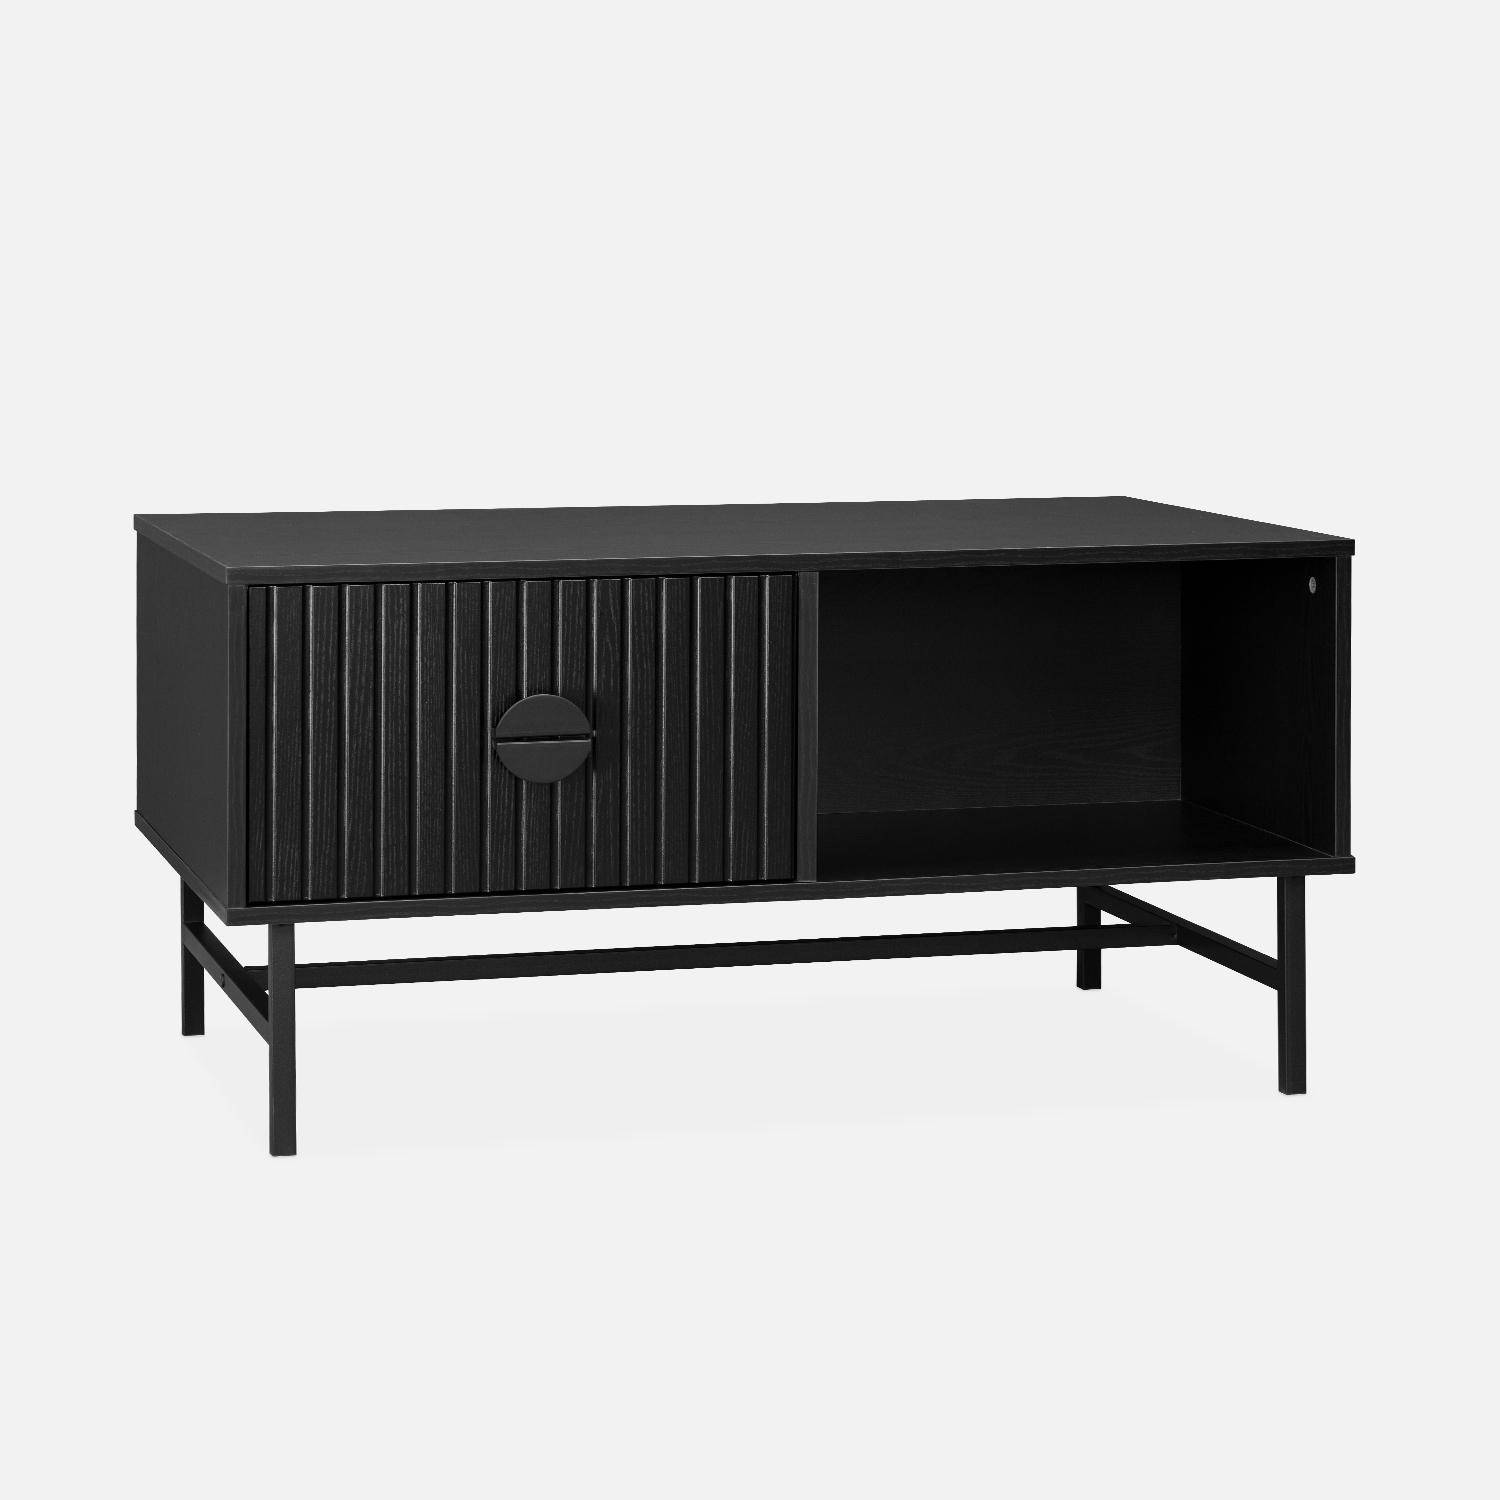 Coffee table with one drawer and one storage nook, ridged effect, industrial style, 100x59x50.2cm - Bazalt - Black,sweeek,Photo4